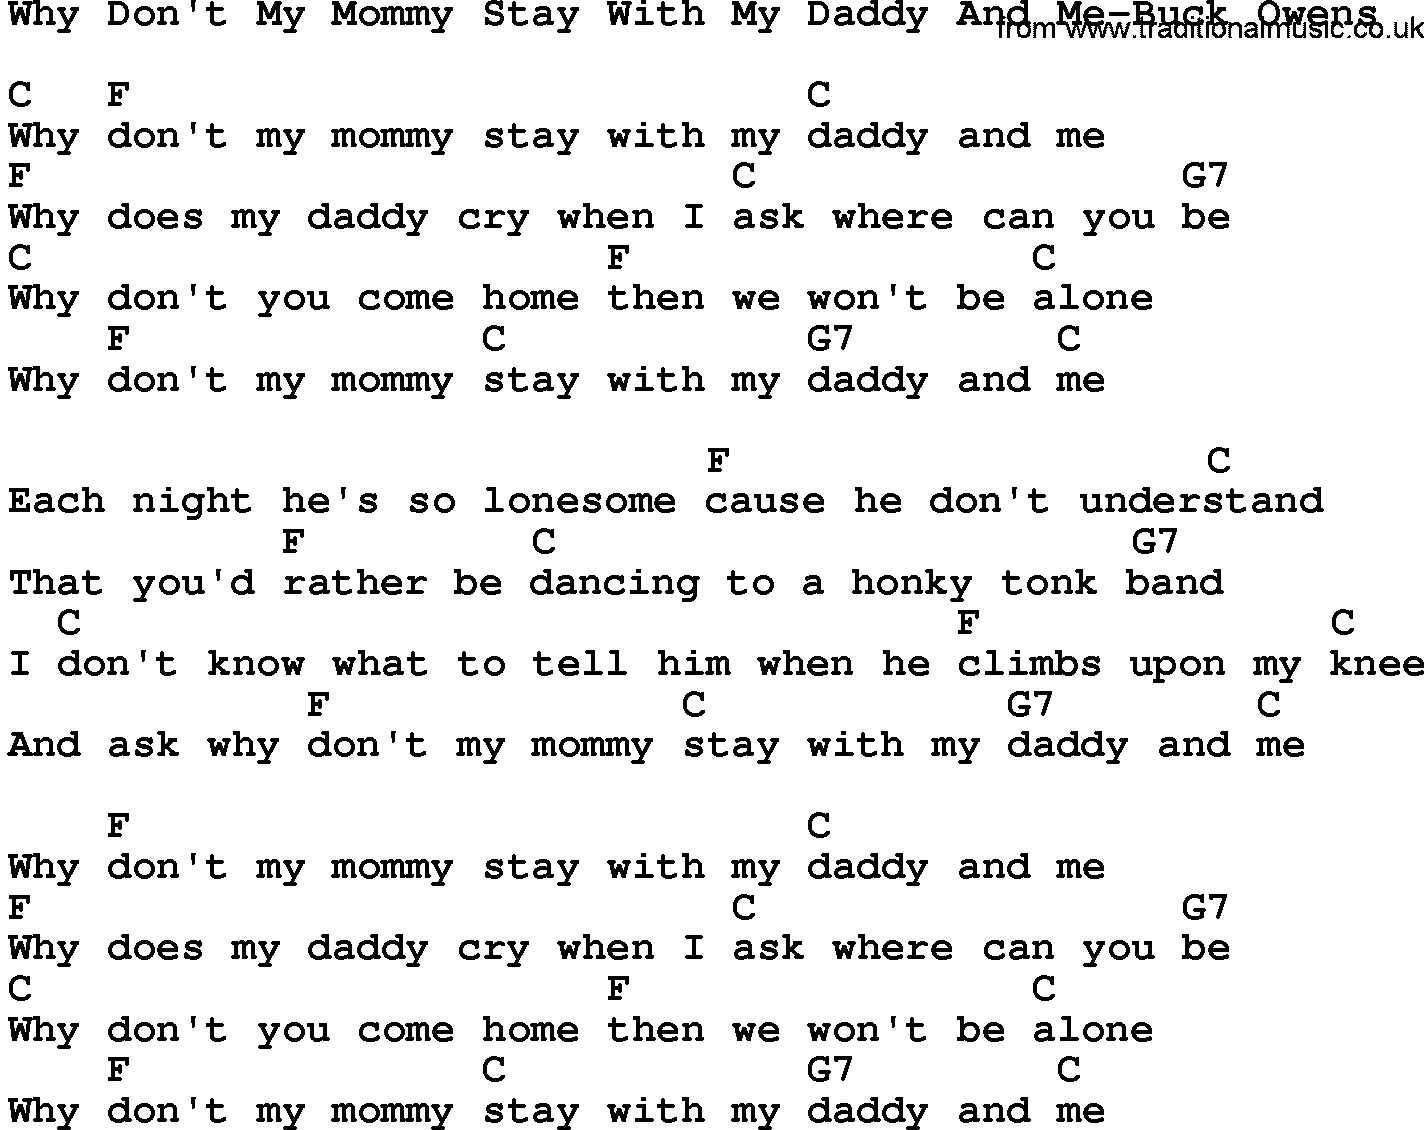 Country music song: Why Don't My Mommy Stay With My Daddy And Me-Buck Owens lyrics and chords